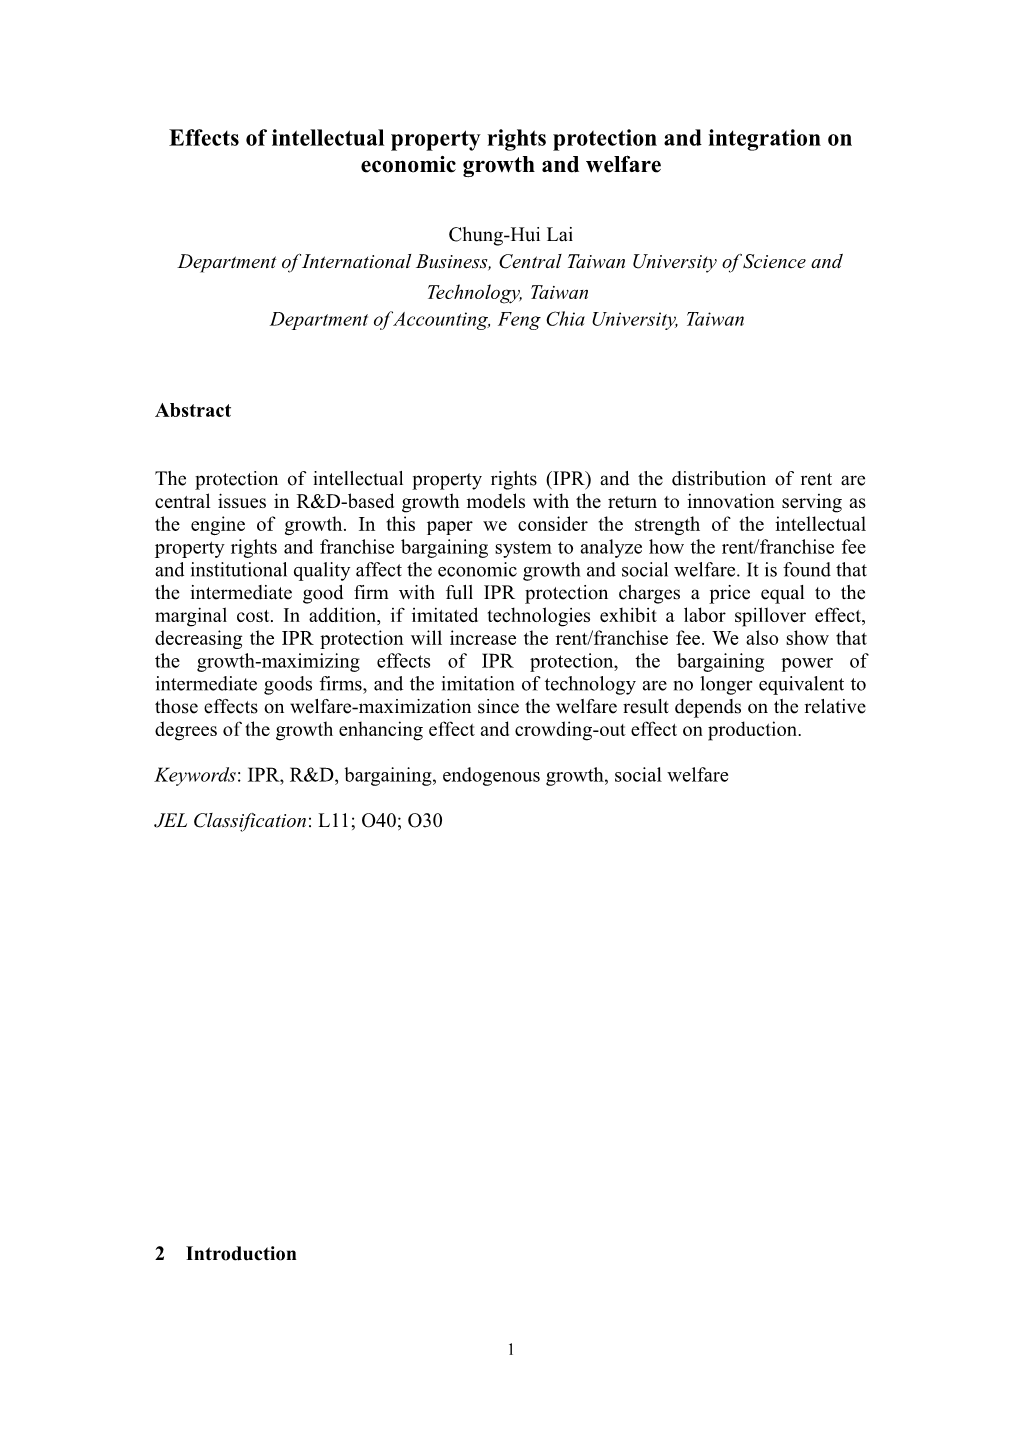 Effects of Intellectual Property Rights Protection and Integrationon Economic Growth And